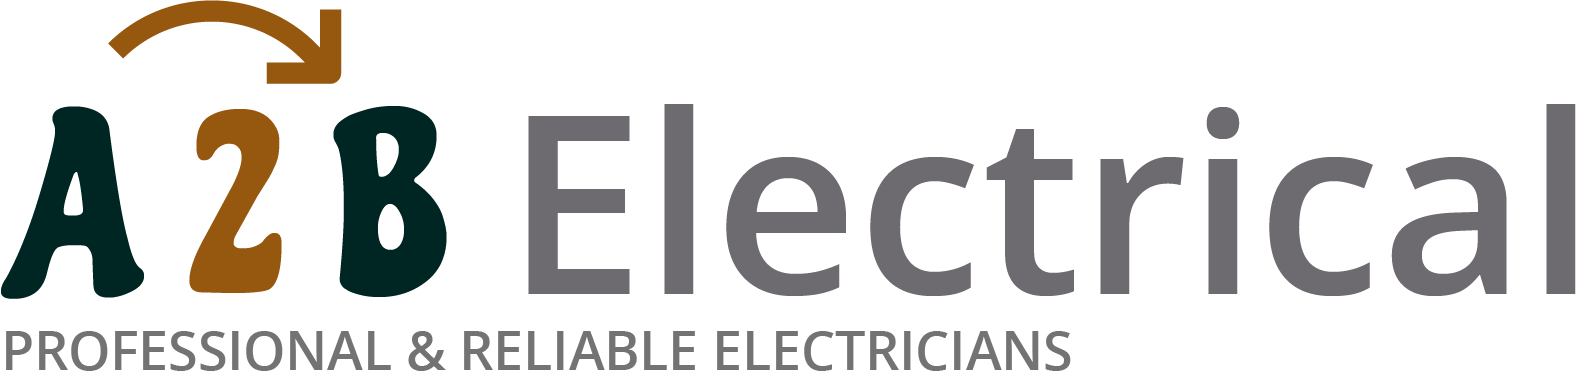 If you have electrical wiring problems in Acton Green, we can provide an electrician to have a look for you. 